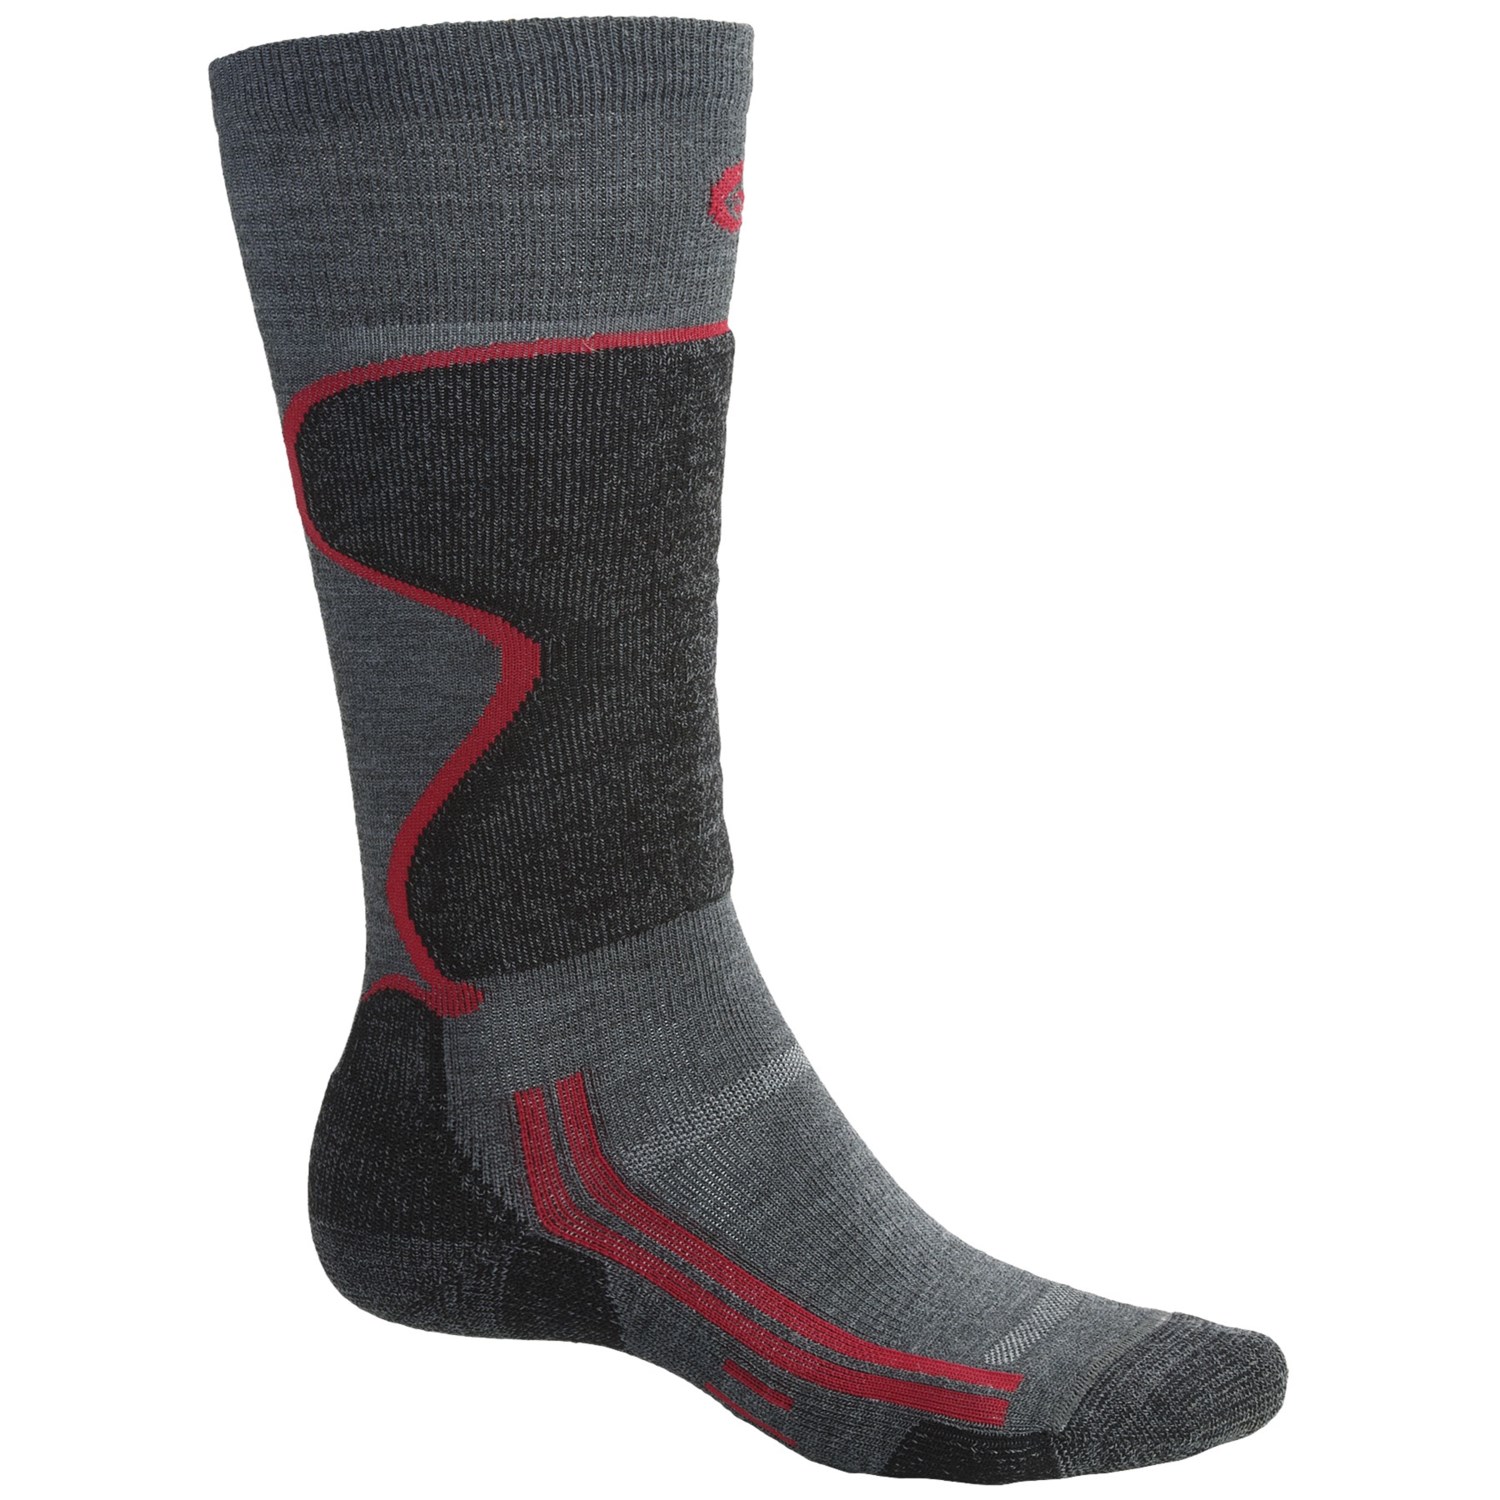 Mens Socks That Stay Up 8